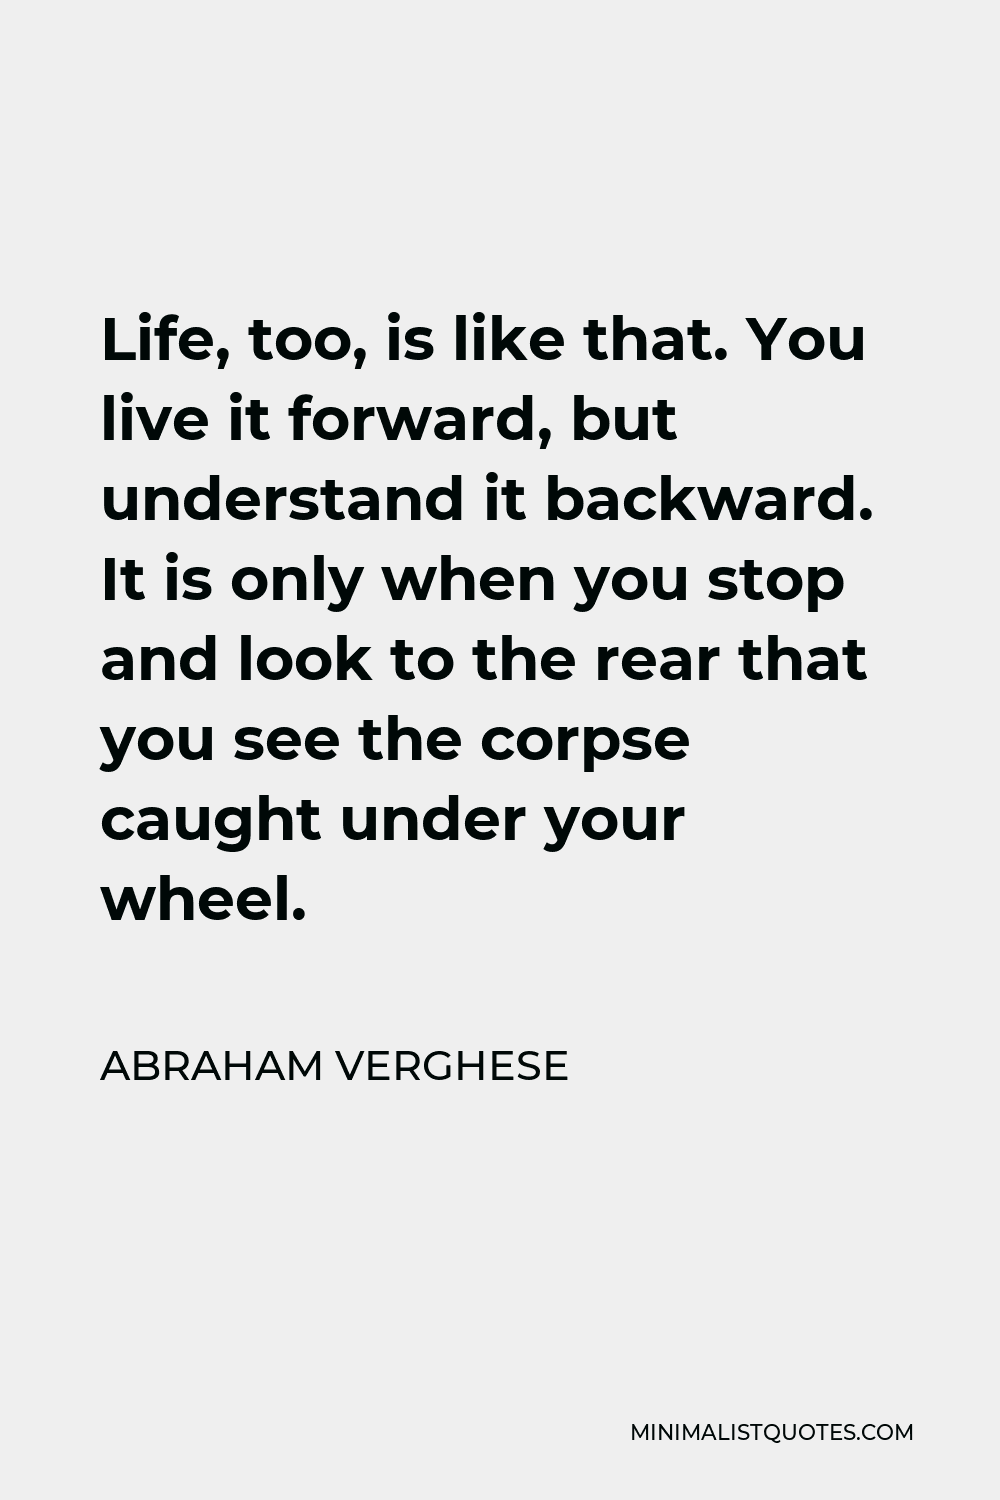 Abraham Verghese Quote - Life, too, is like that. You live it forward, but understand it backward. It is only when you stop and look to the rear that you see the corpse caught under your wheel.